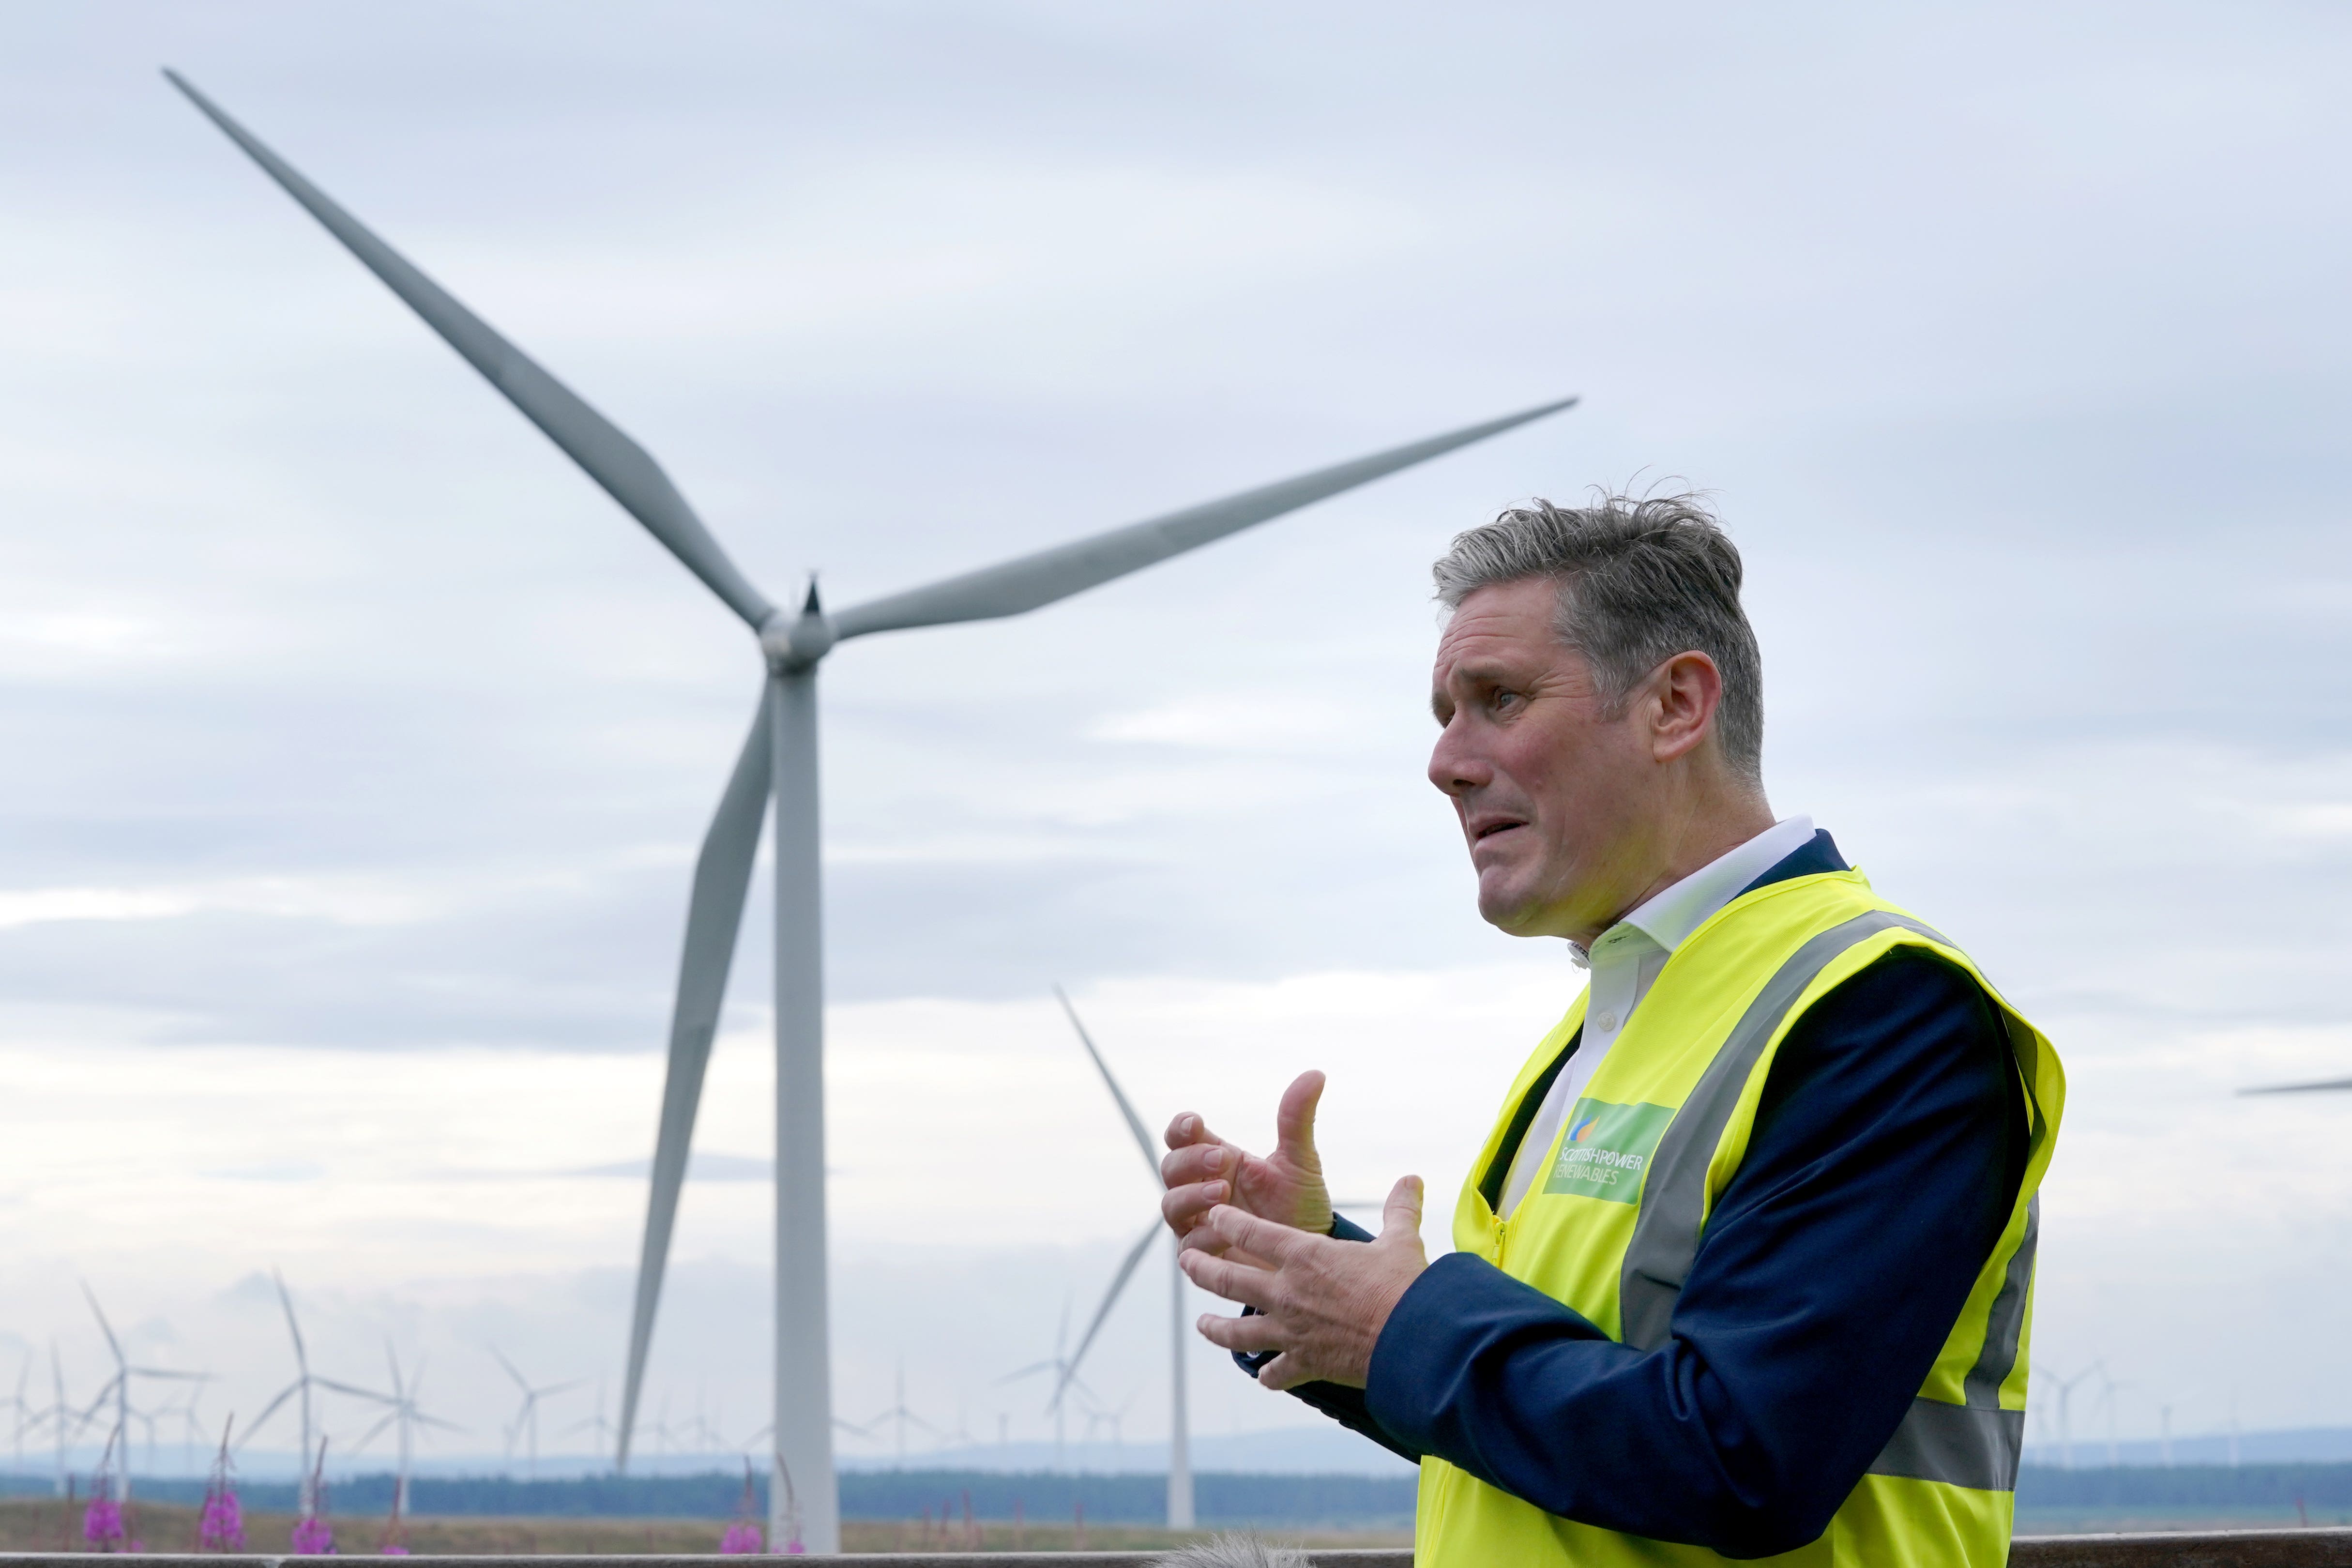 The Labour leader during a visit to Whitelees wind farm in Scotland